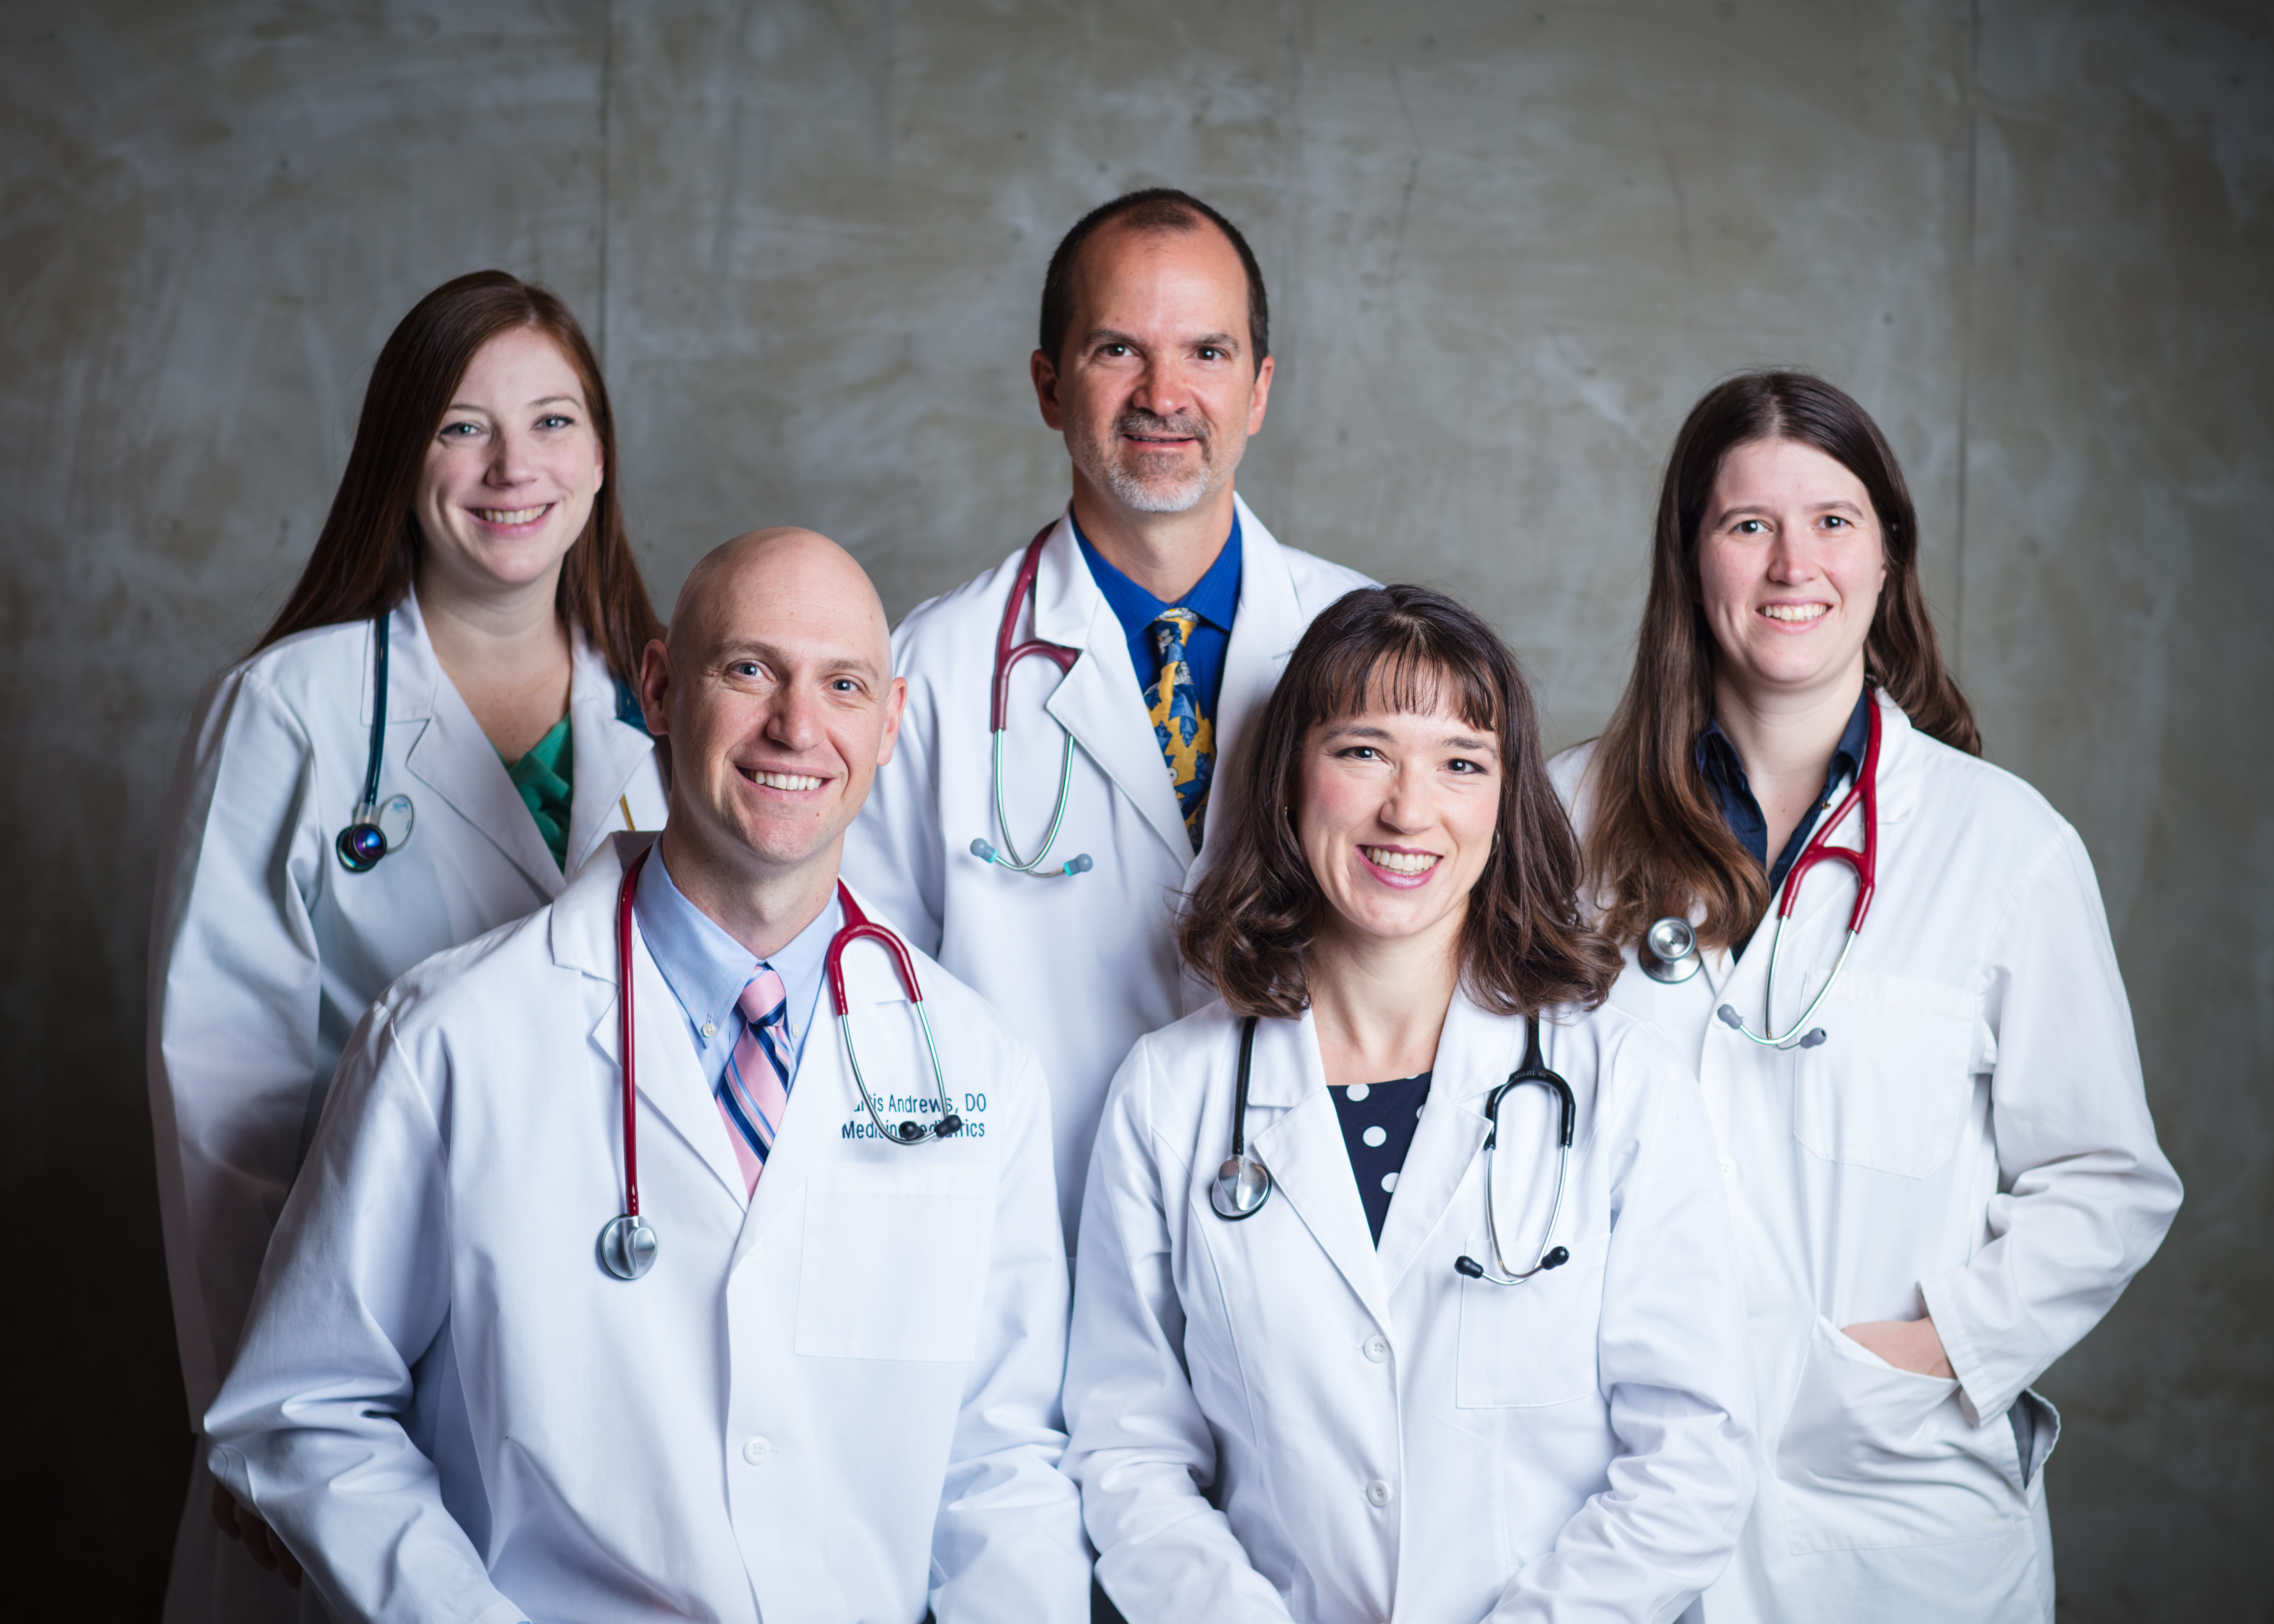 Receive The Best Care From Top Doctors At Copperview Medical Center